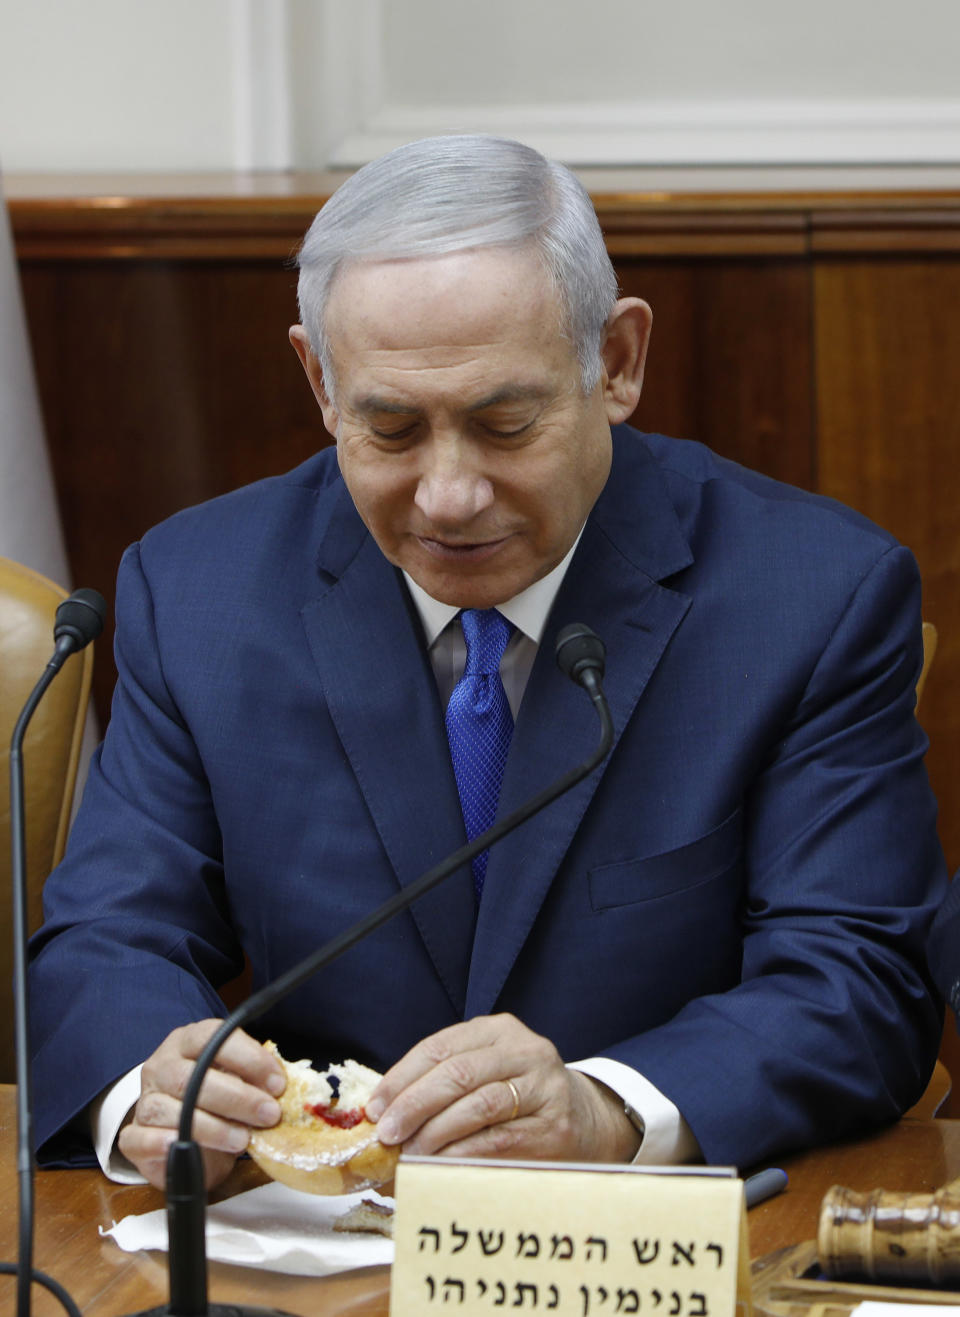 Israeli Prime Minister Benjamin Netanyahu attends the weekly cabinet meeting at his office in Jerusalem, Sunday Dec. 2, 2018. Israeli police on Sunday recommended indicting Prime Minister Netanyahu on bribery charge allegations related to a corruption case involving Israel's Bezeq telecom giant. (Gali Tibbon/Pool via AP)